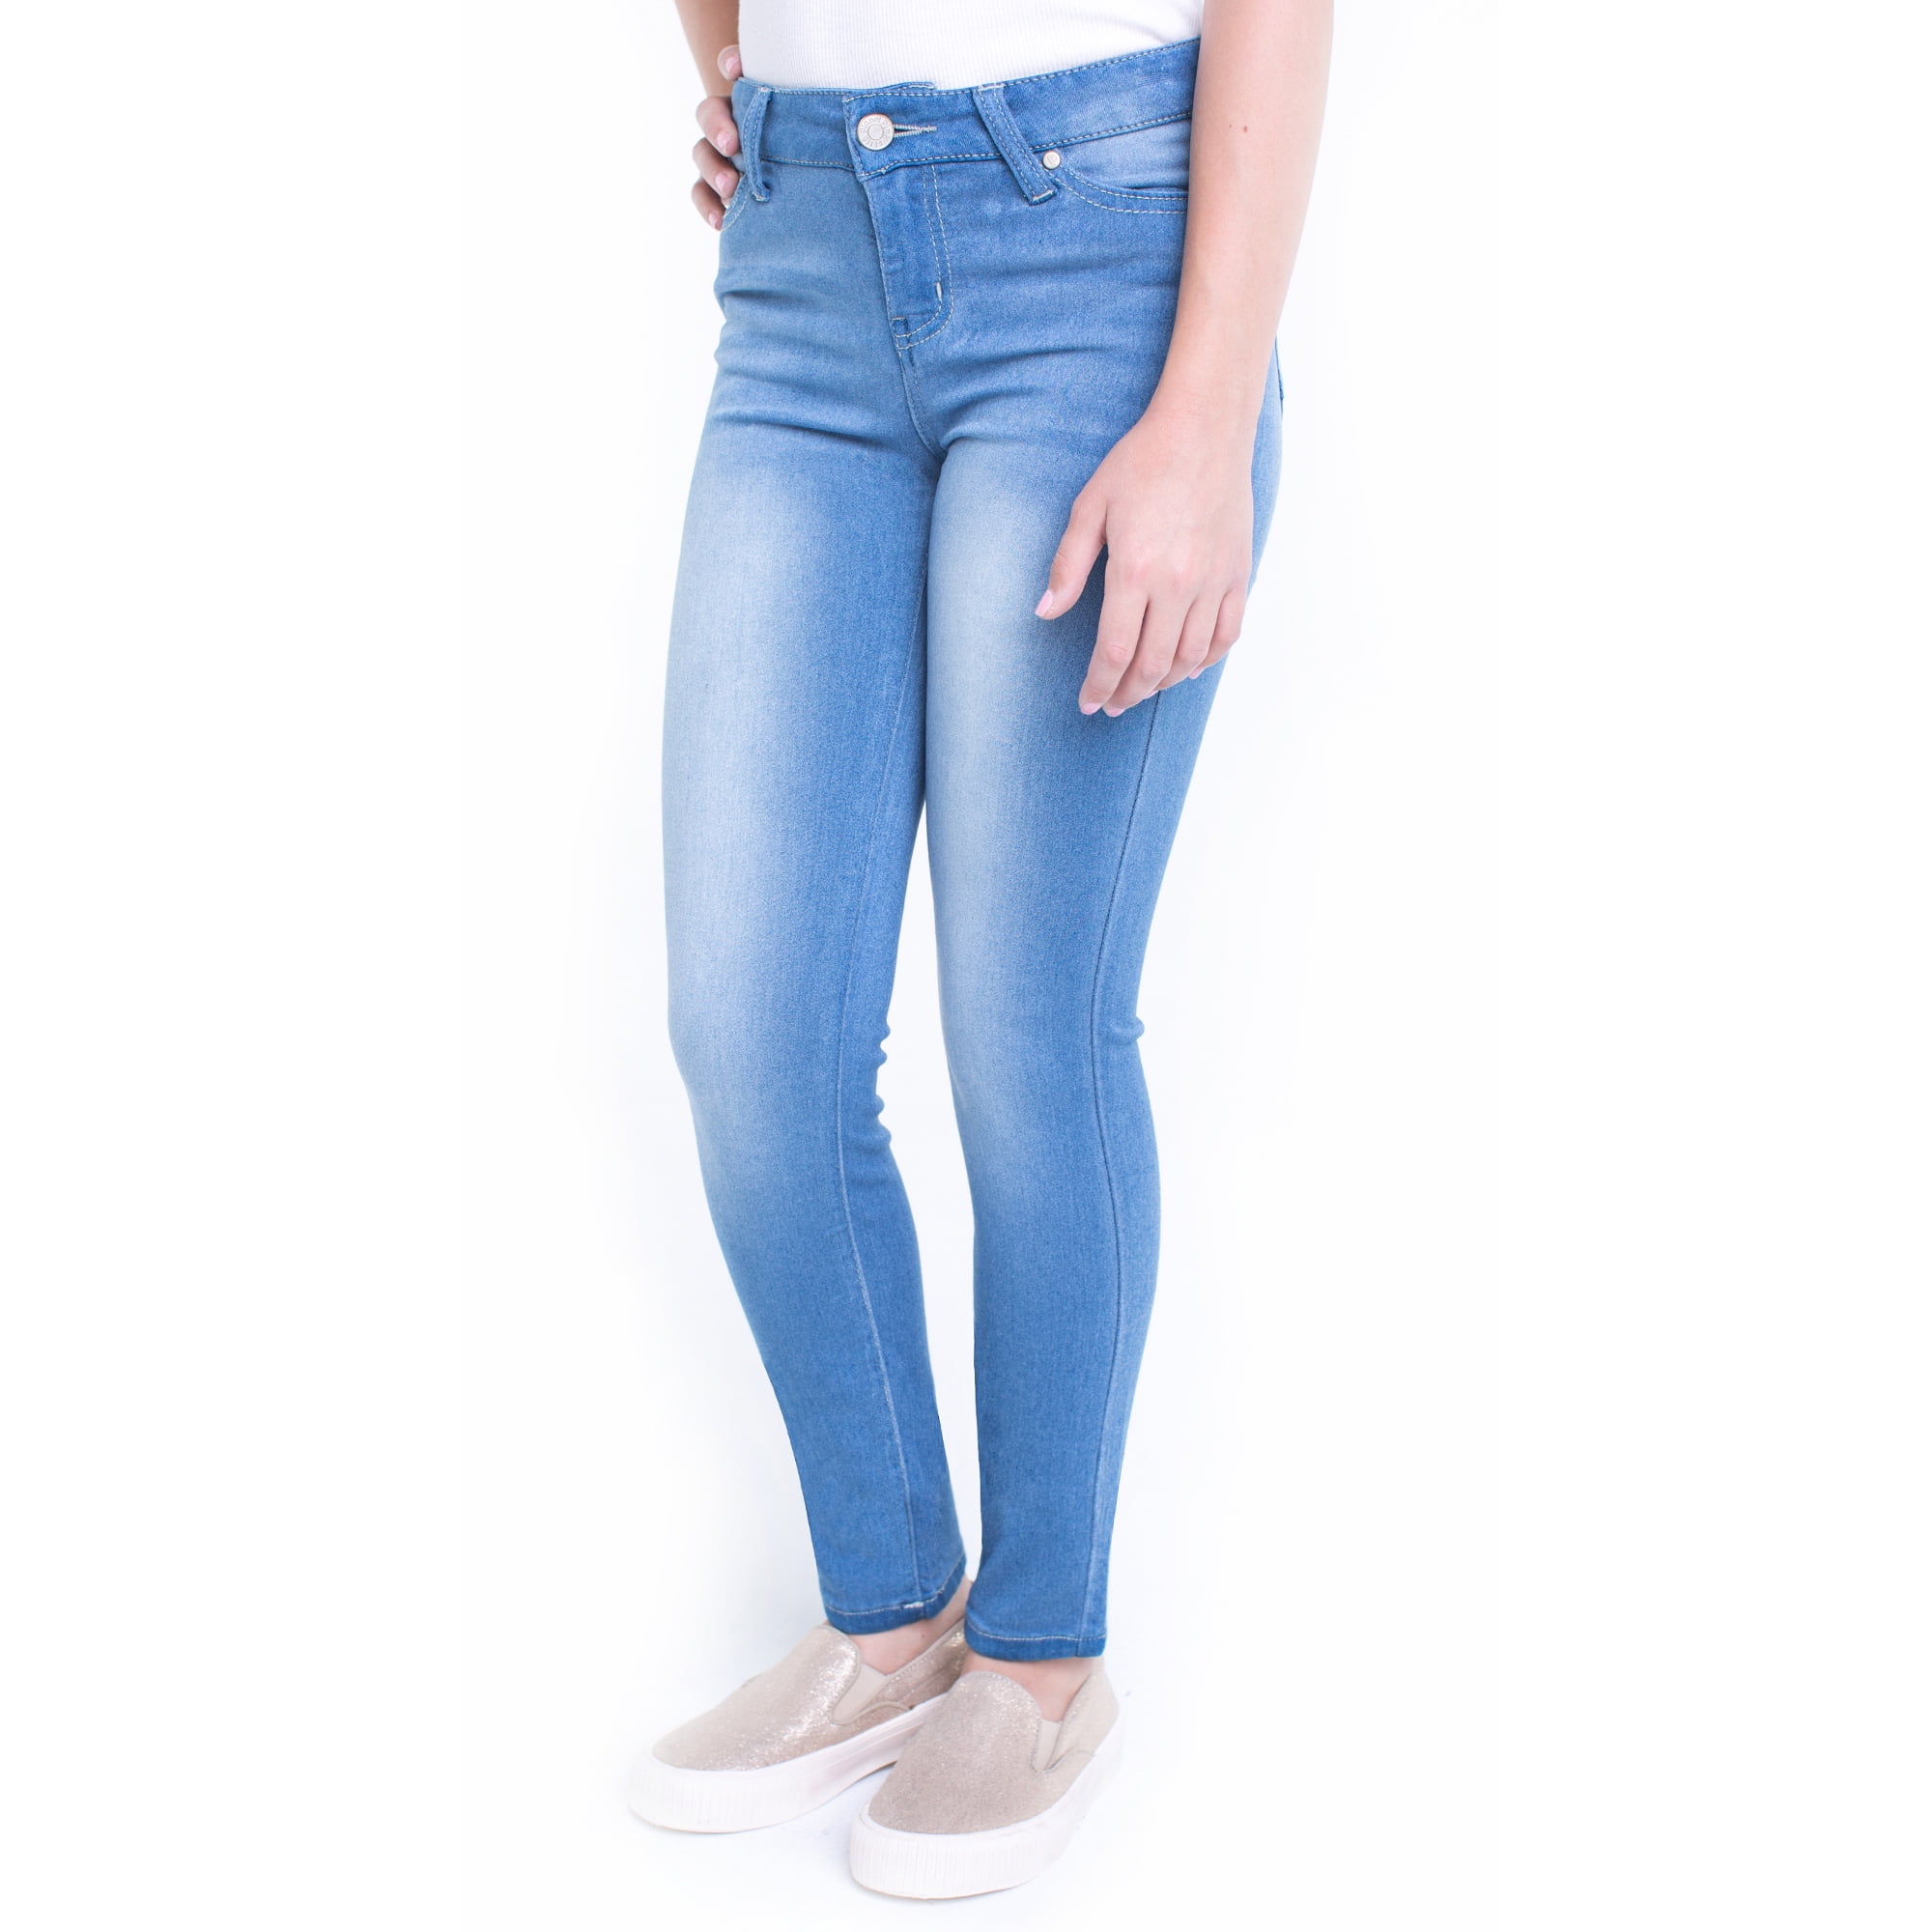 Planet Pink - Planet Pink Girls Super Soft Skinny Jeans, Sizes 6-16 ...